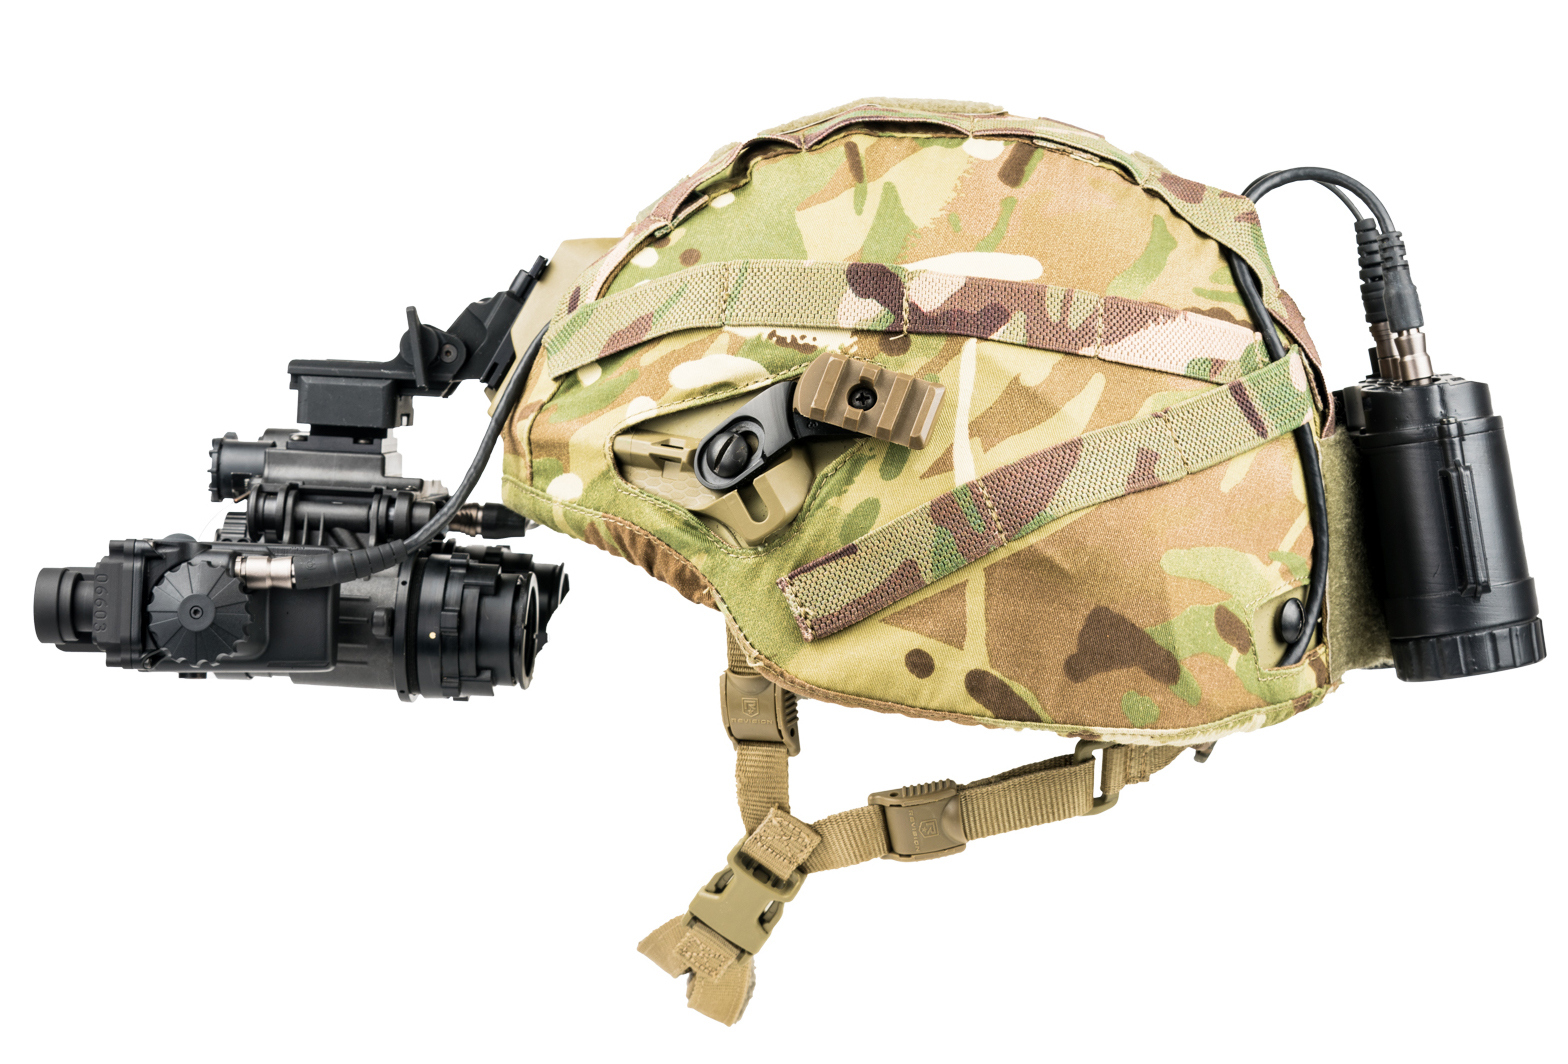 Thermoteknix Launches New Augmented Reality Tactical Interface Module (ARTIM) with ATAK Capabilities